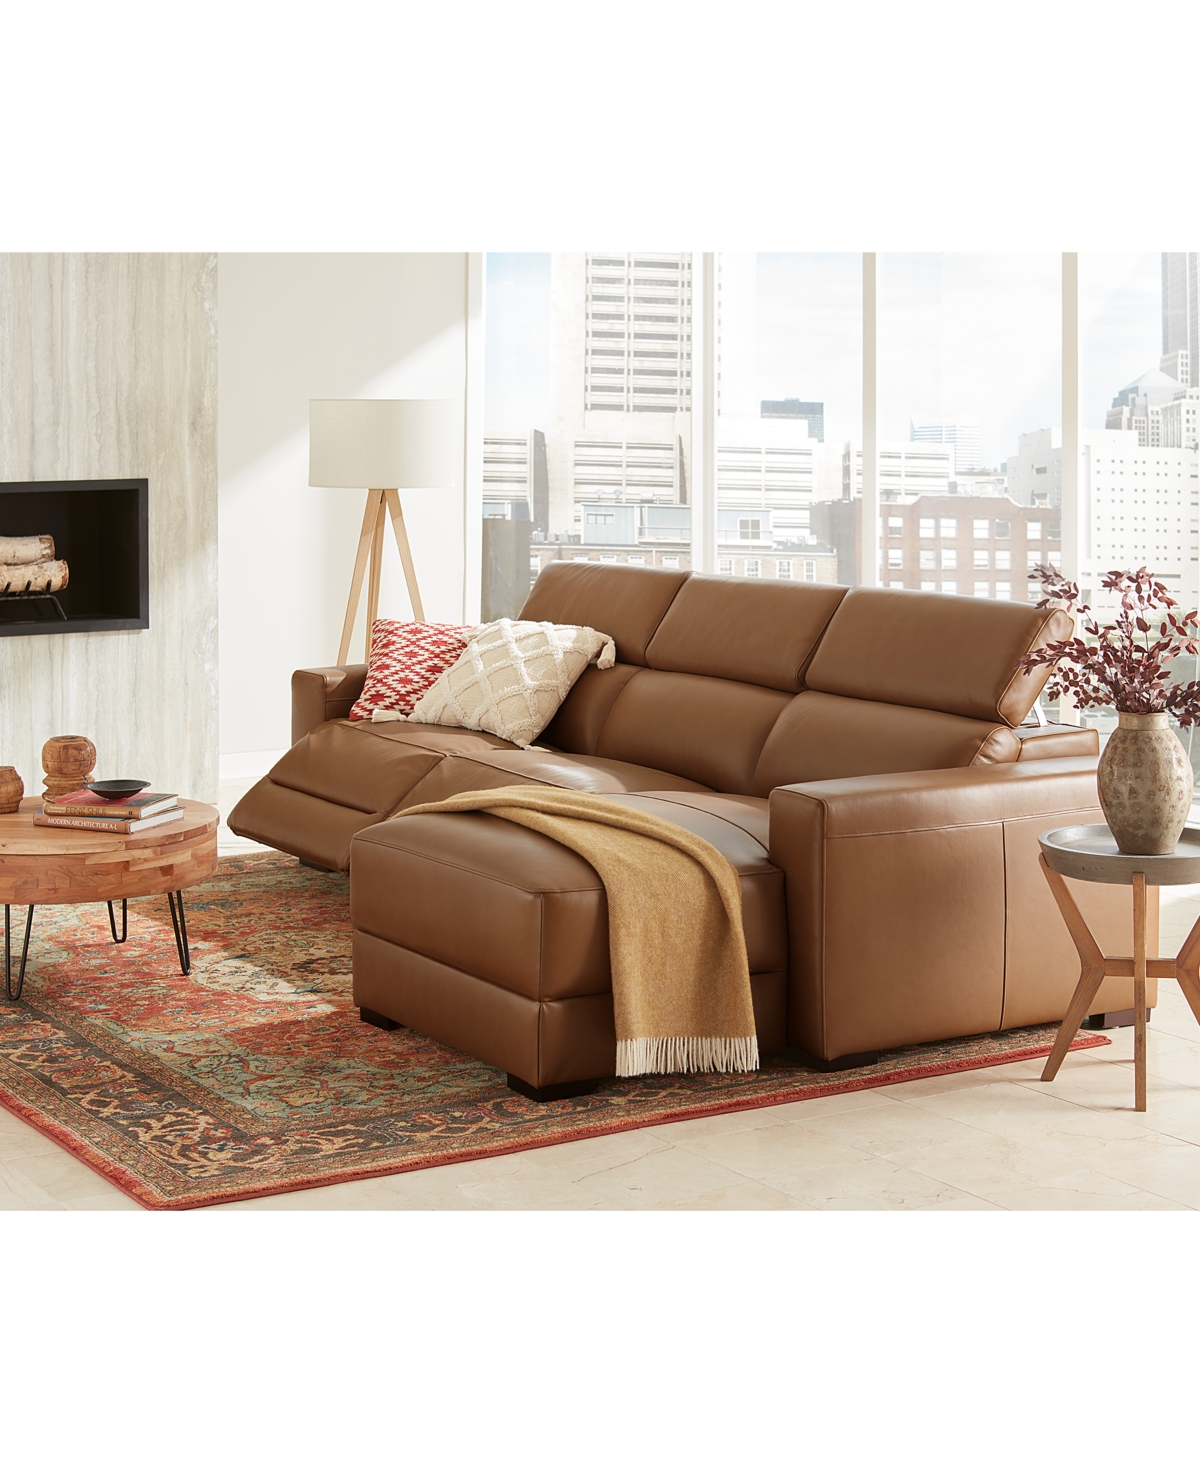 Shop Macy's Nevio 115" 3-pc. Leather Sectional With 2 Power Recliners, Headrests And Chaise, Created For  In Butternut